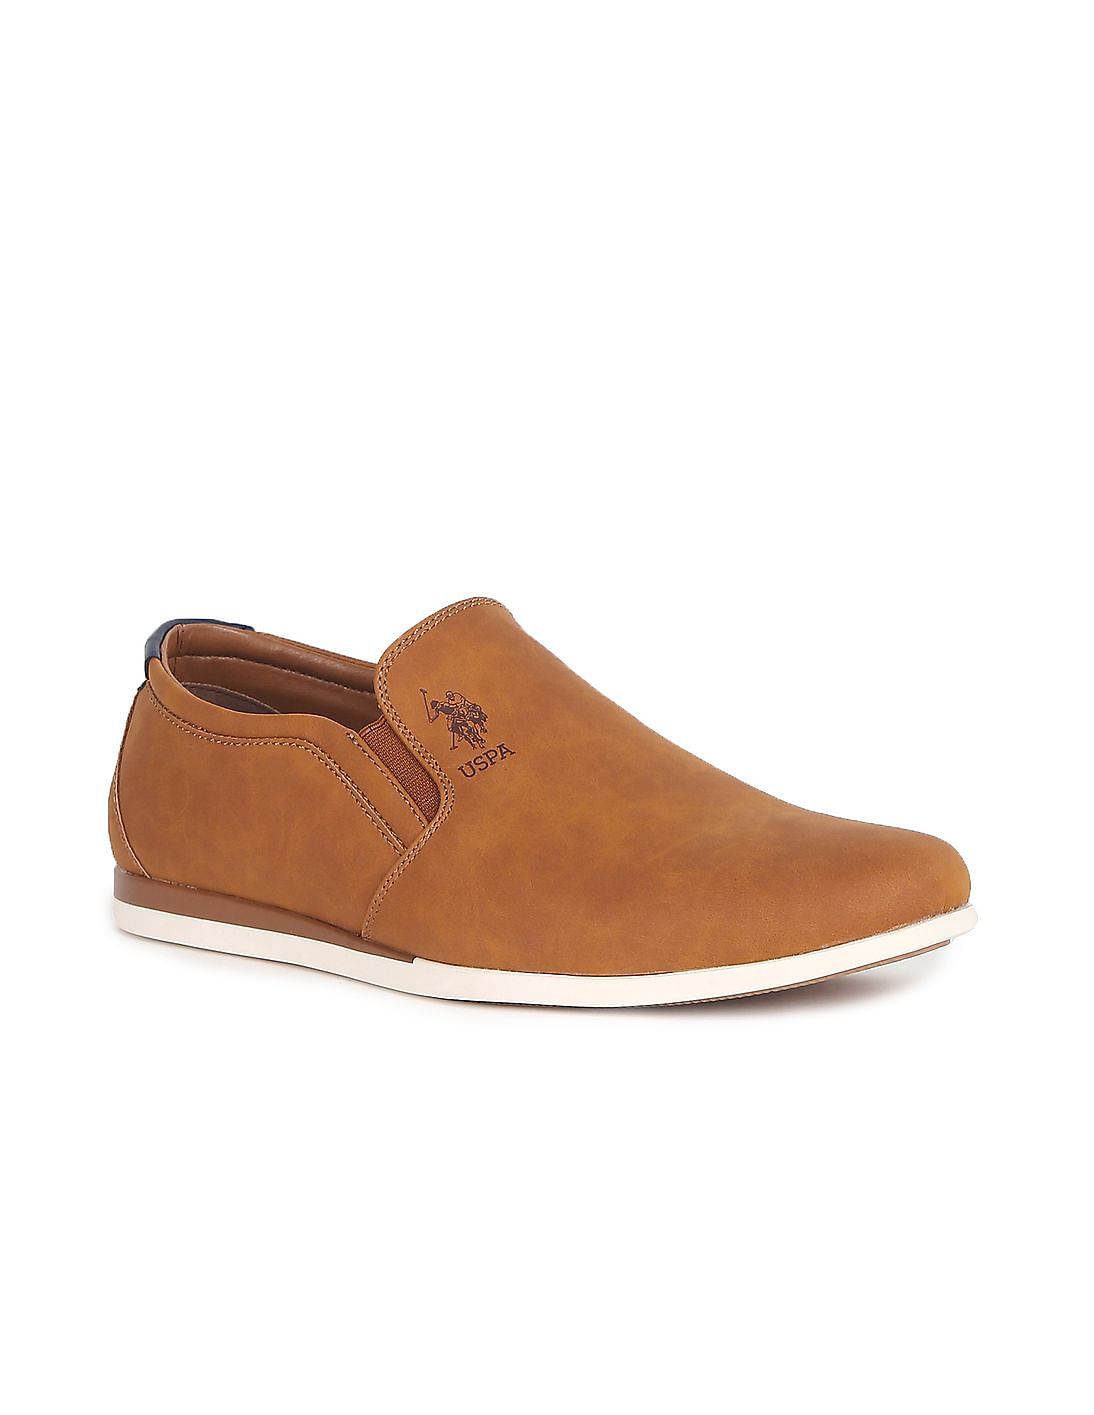 Buy U.S. Polo Assn. Round Toe Textured Wade Slip On Shoes - NNNOW.com